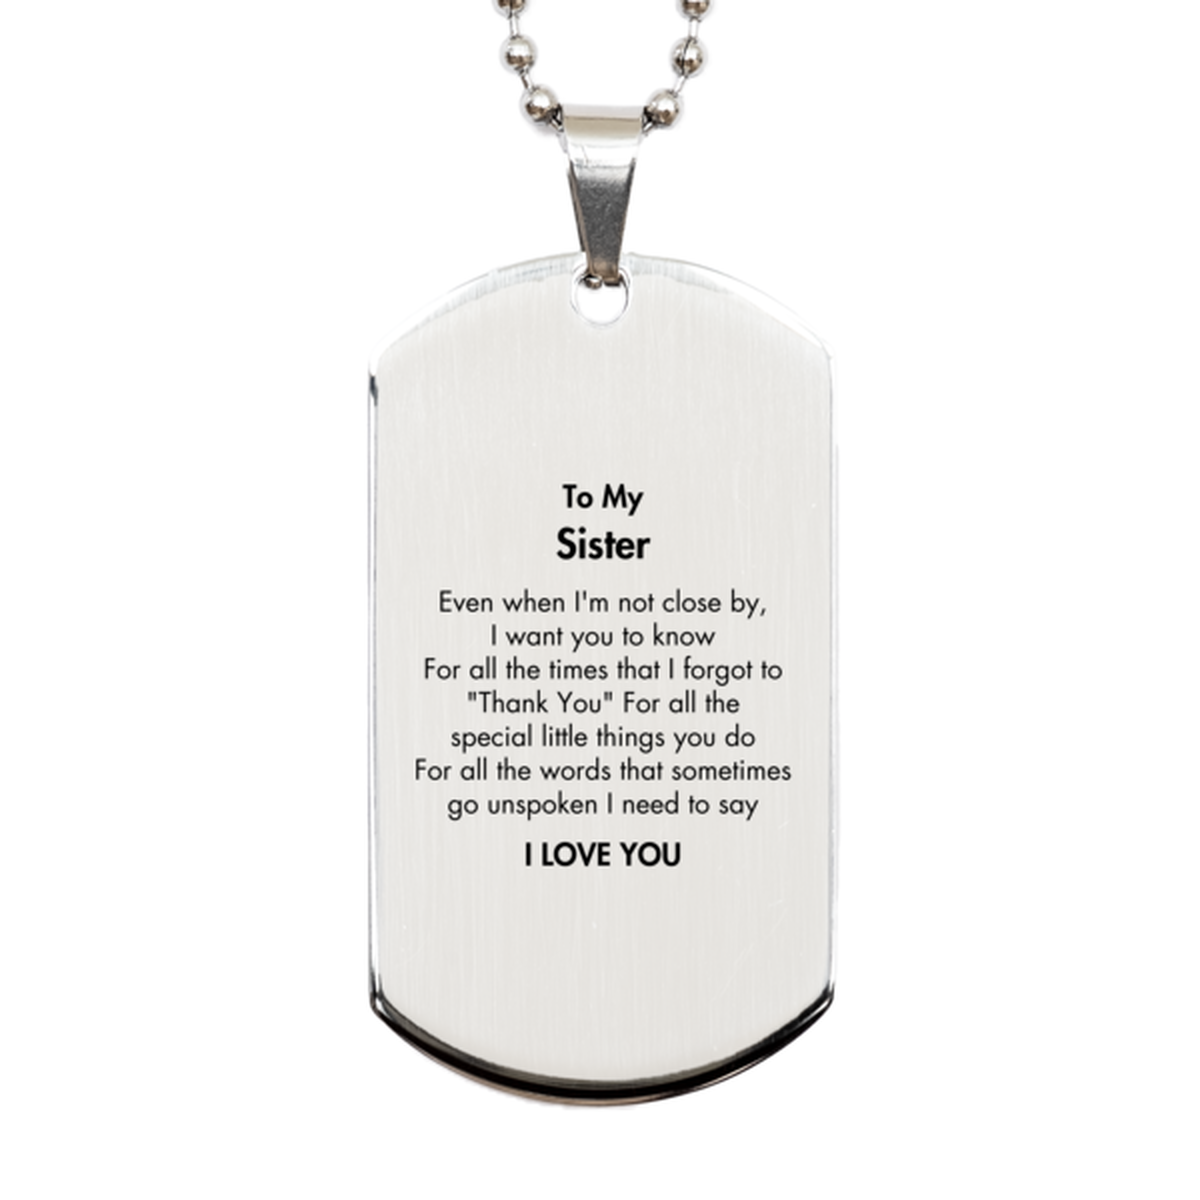 Thank You Gifts for Sister, Keepsake Silver Dog Tag Gifts for Sister Birthday Mother's day Father's Day Sister For all the words That sometimes go unspoken I need to say I LOVE YOU